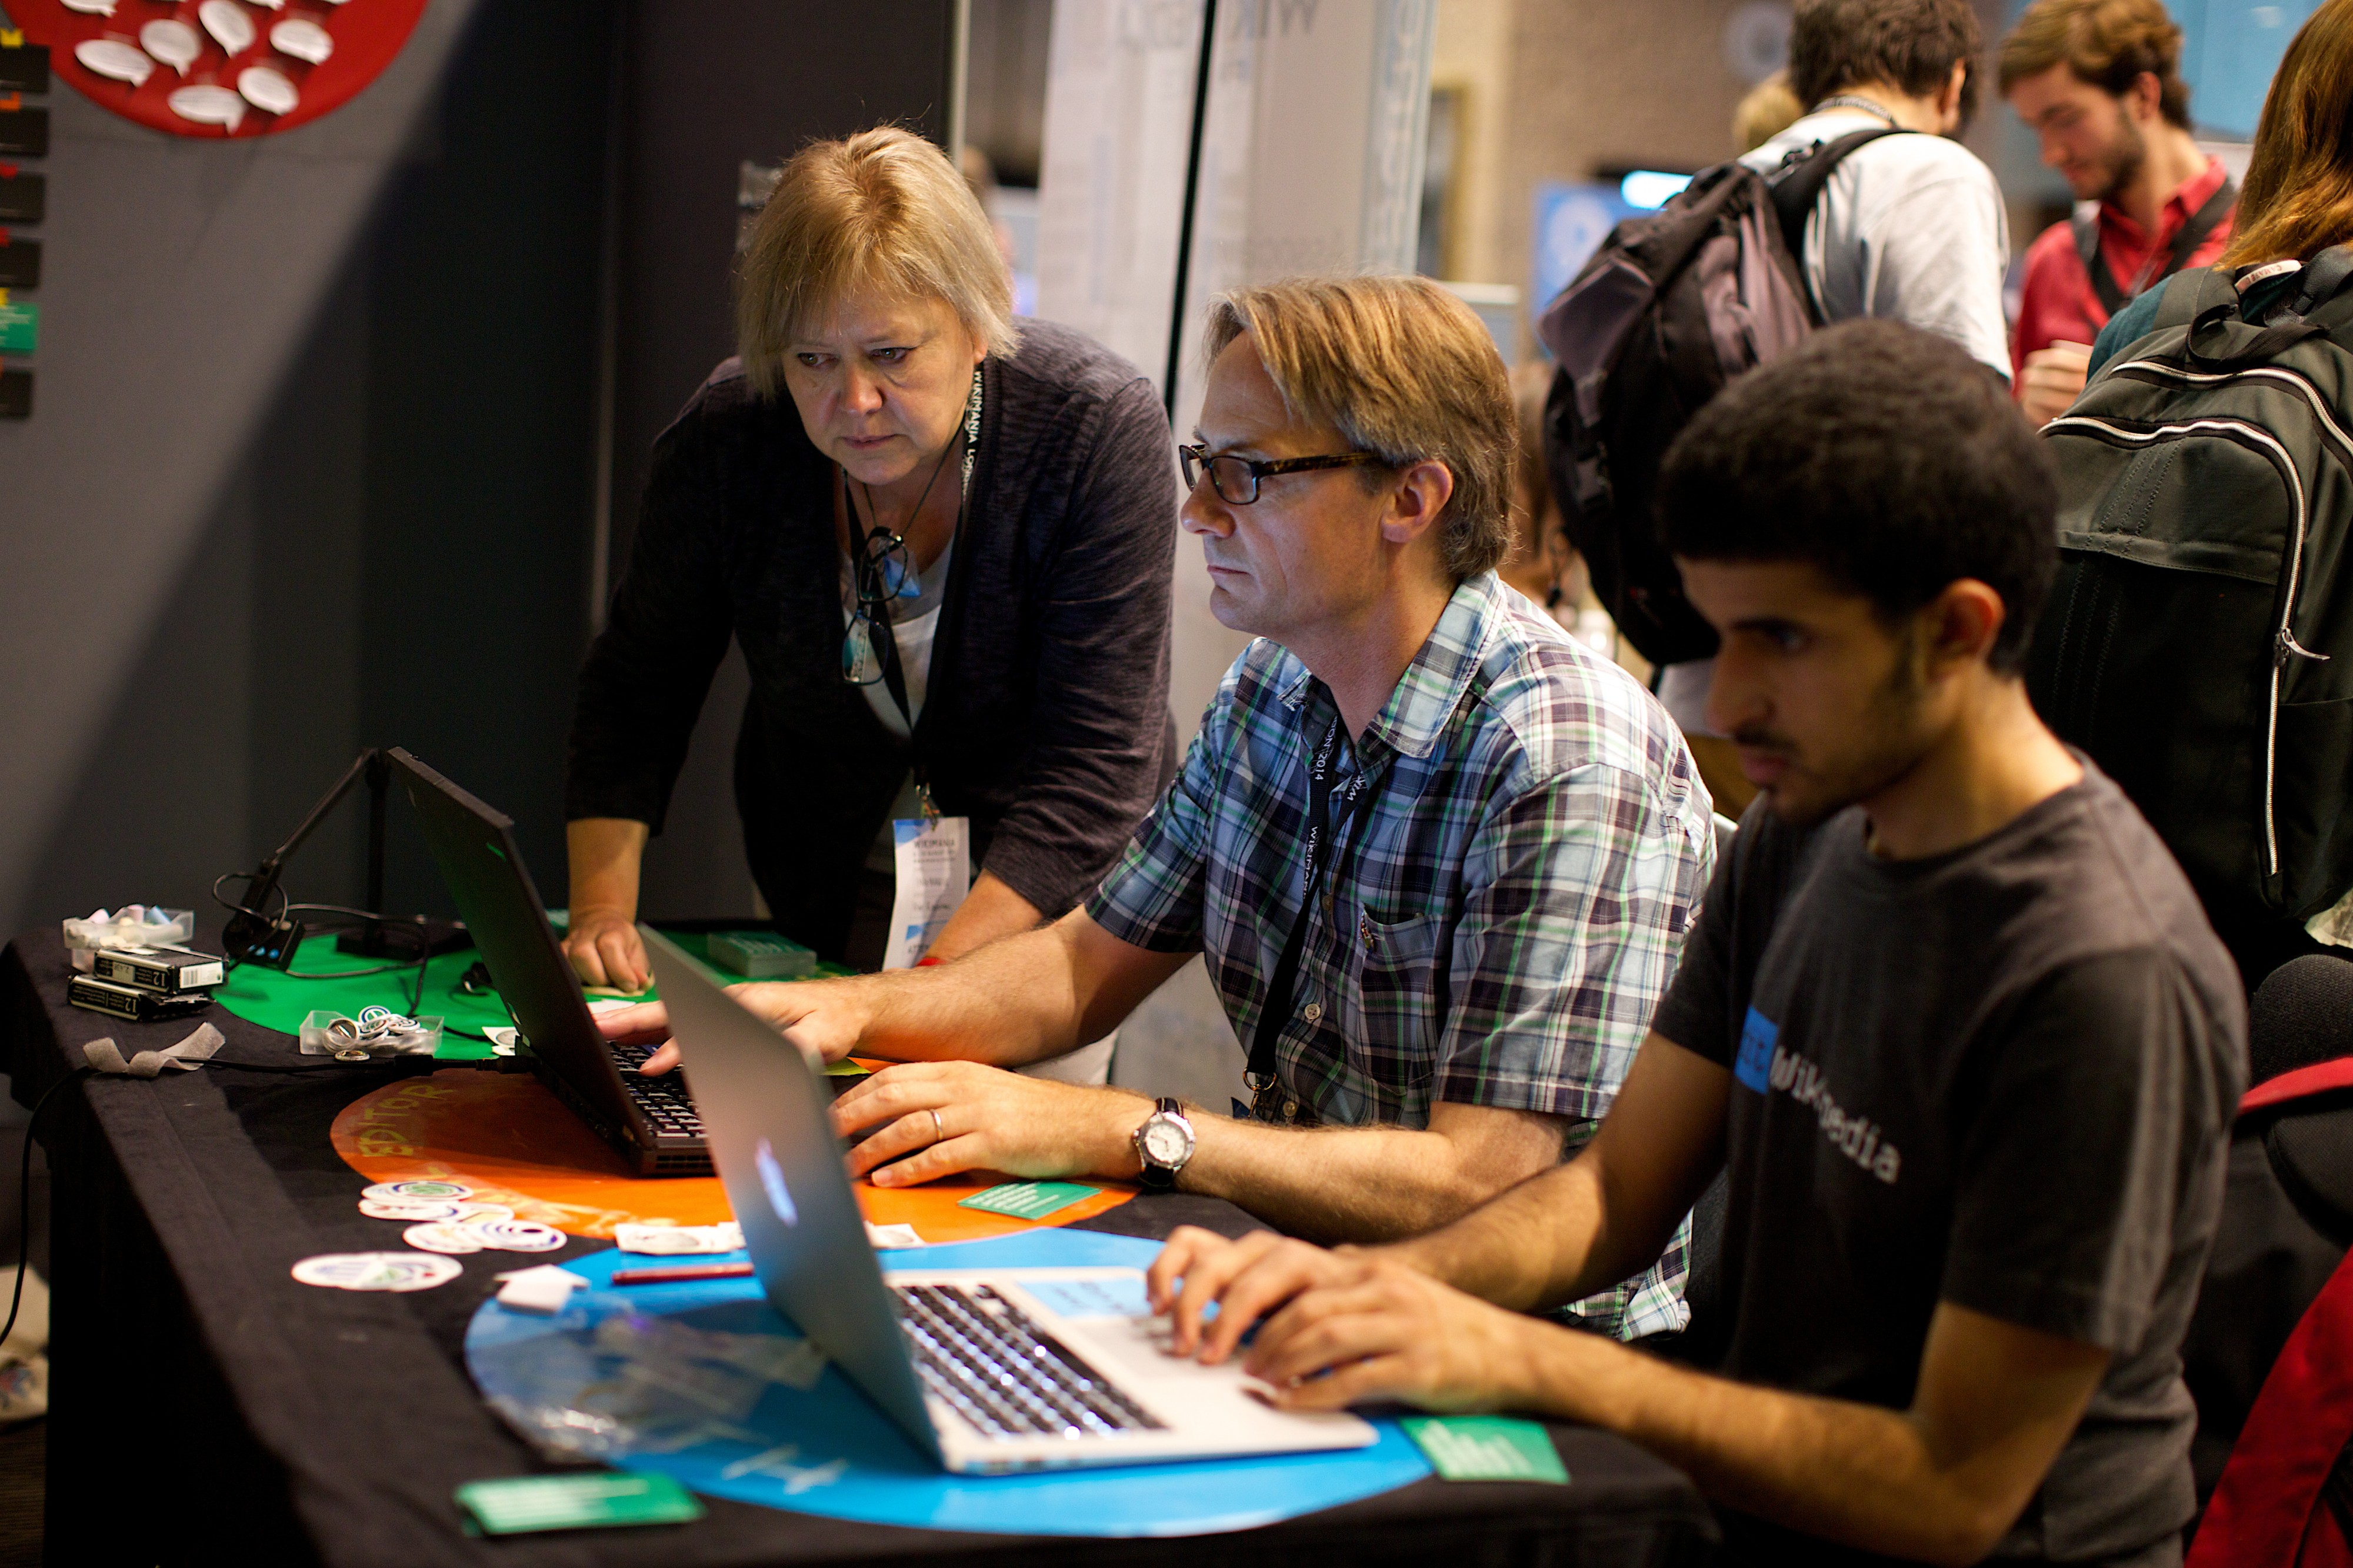 Ad Huikeshoven, Wikimedia Nederland, testing software in the community village at Wikimania 2014